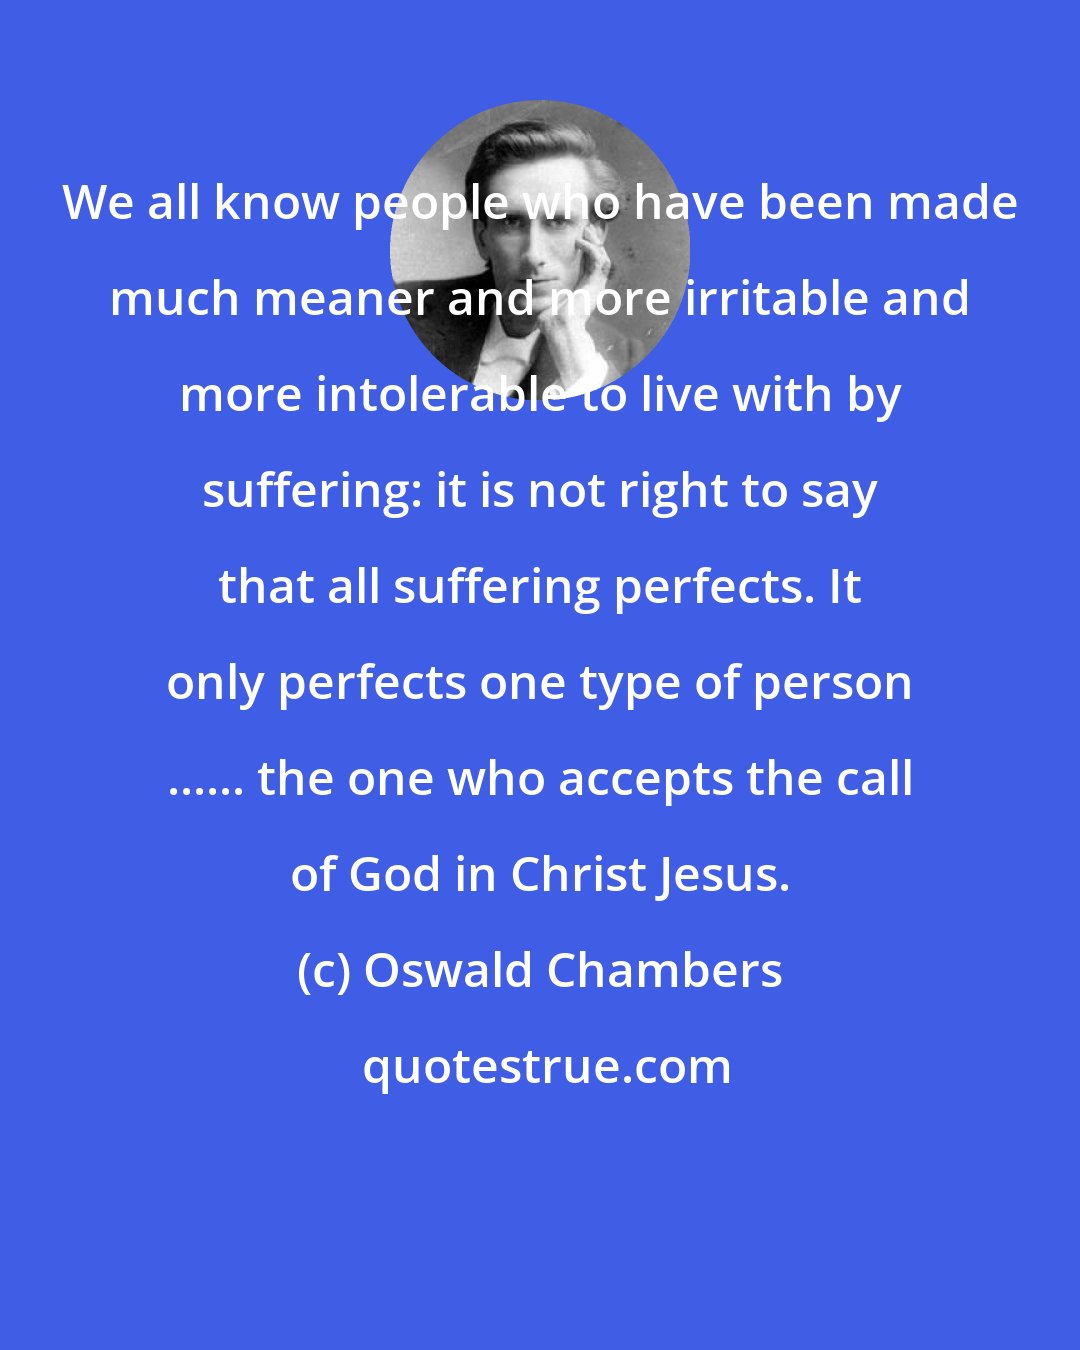 Oswald Chambers: We all know people who have been made much meaner and more irritable and more intolerable to live with by suffering: it is not right to say that all suffering perfects. It only perfects one type of person ...... the one who accepts the call of God in Christ Jesus.